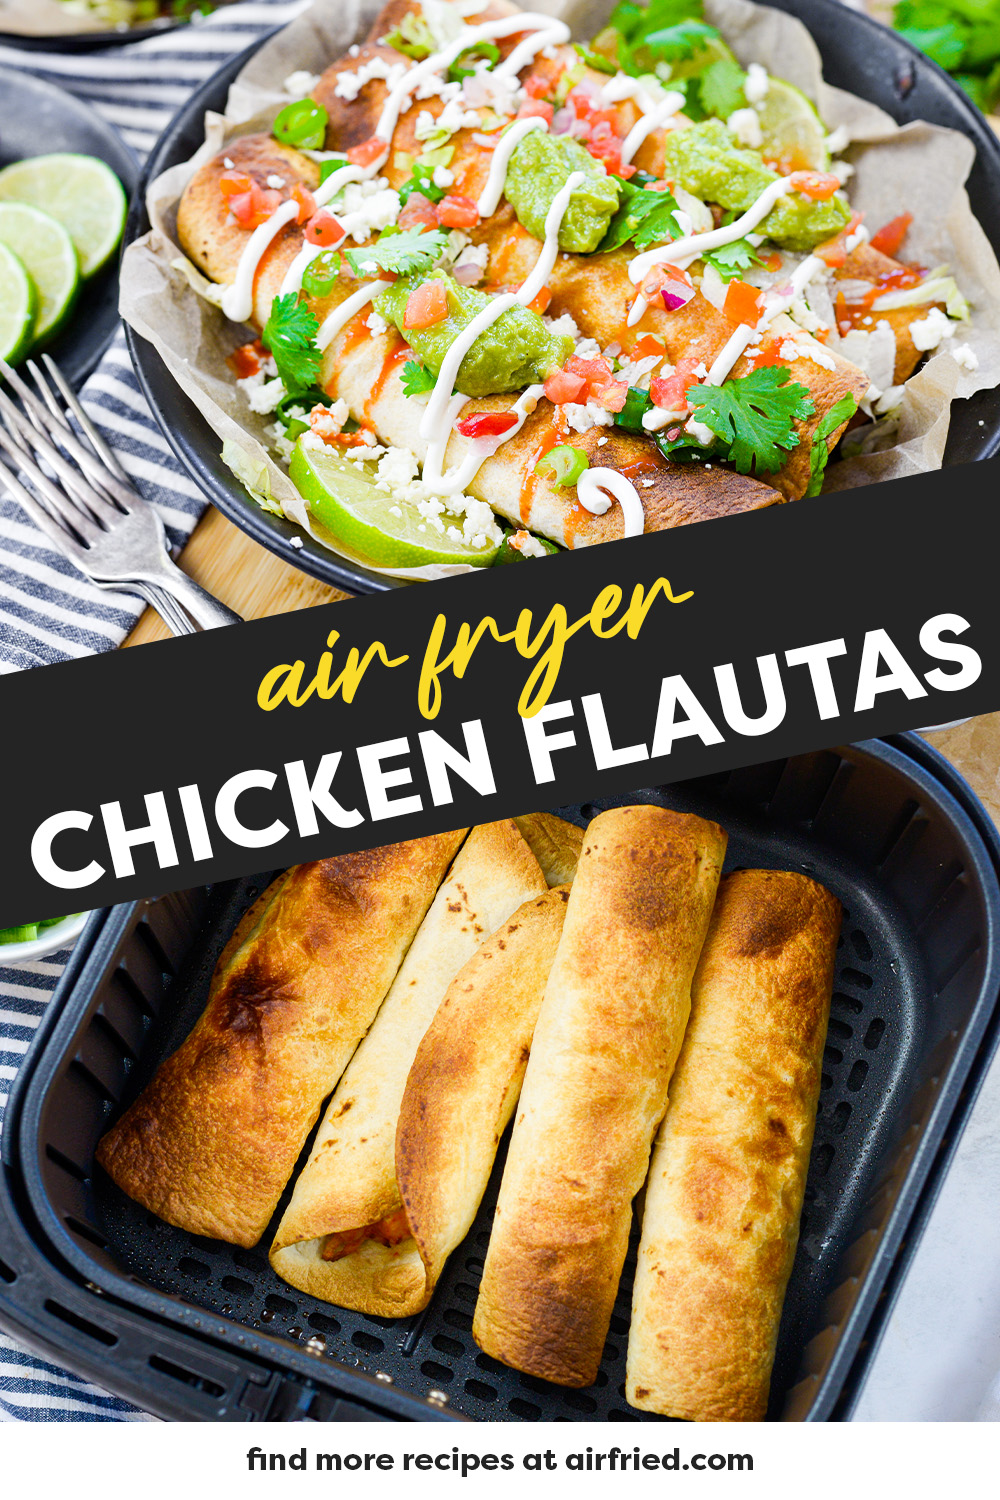 These air fryer chicken flautas come out crispy, flavorful, and so good looking!  